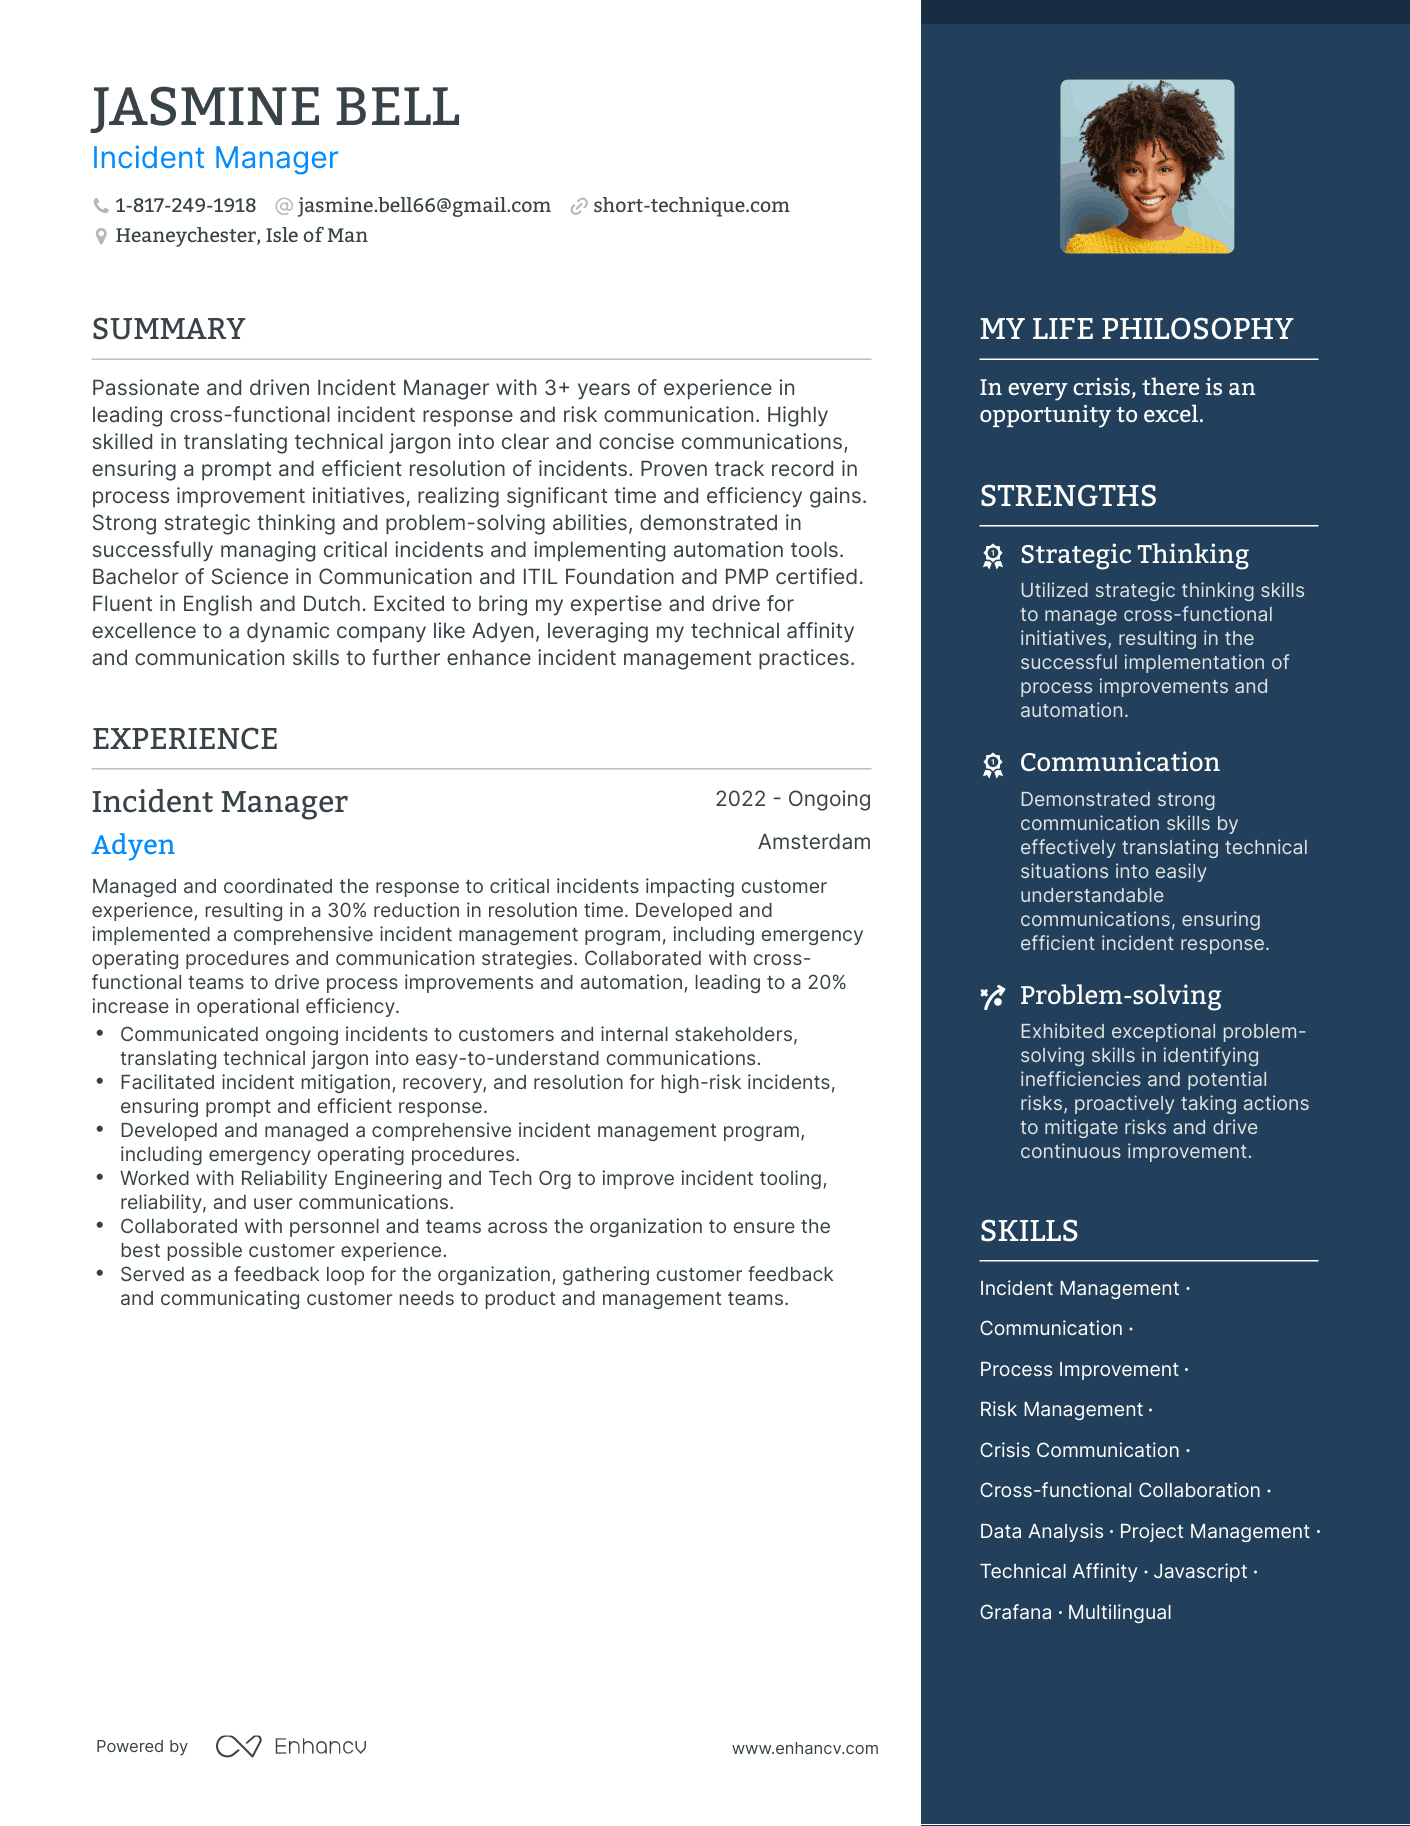 Incident Manager resume example